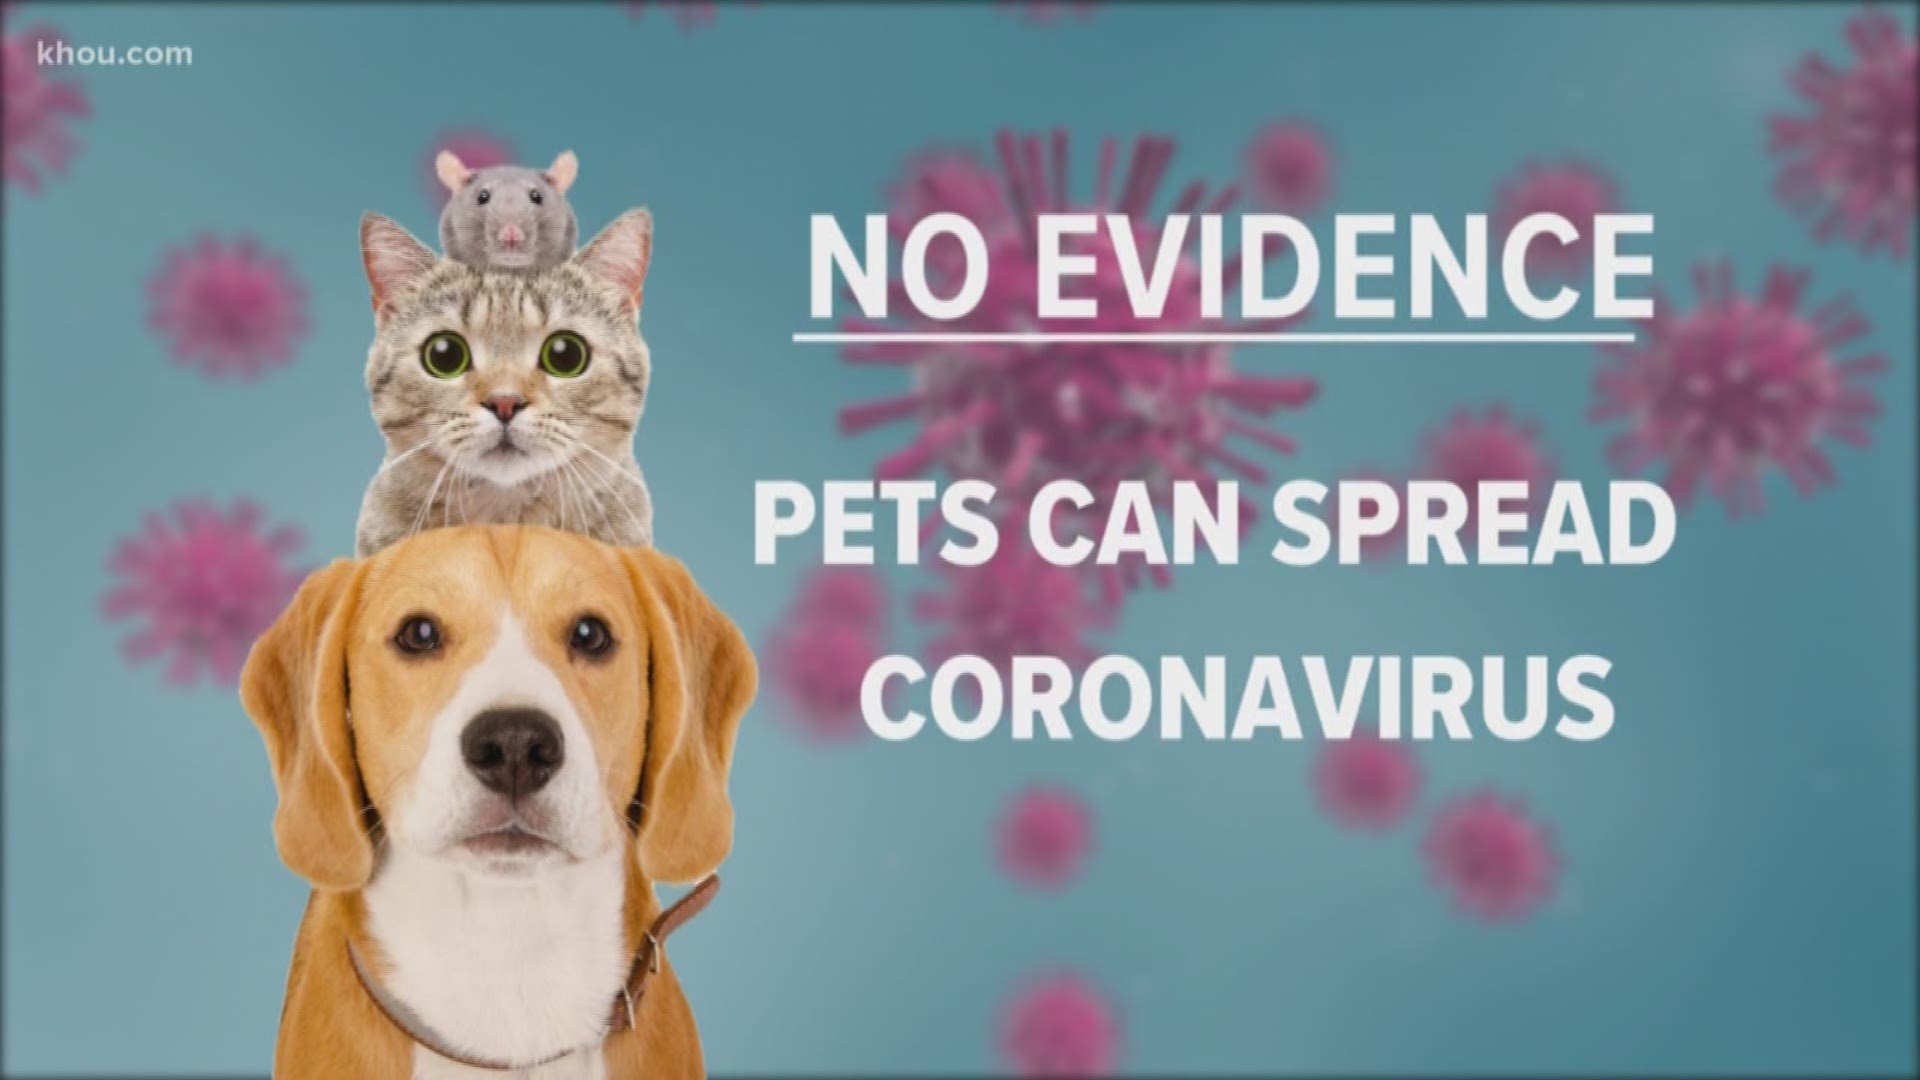 Here is what our friends at Houston Humane Society want pet owners to know about coronavirus.